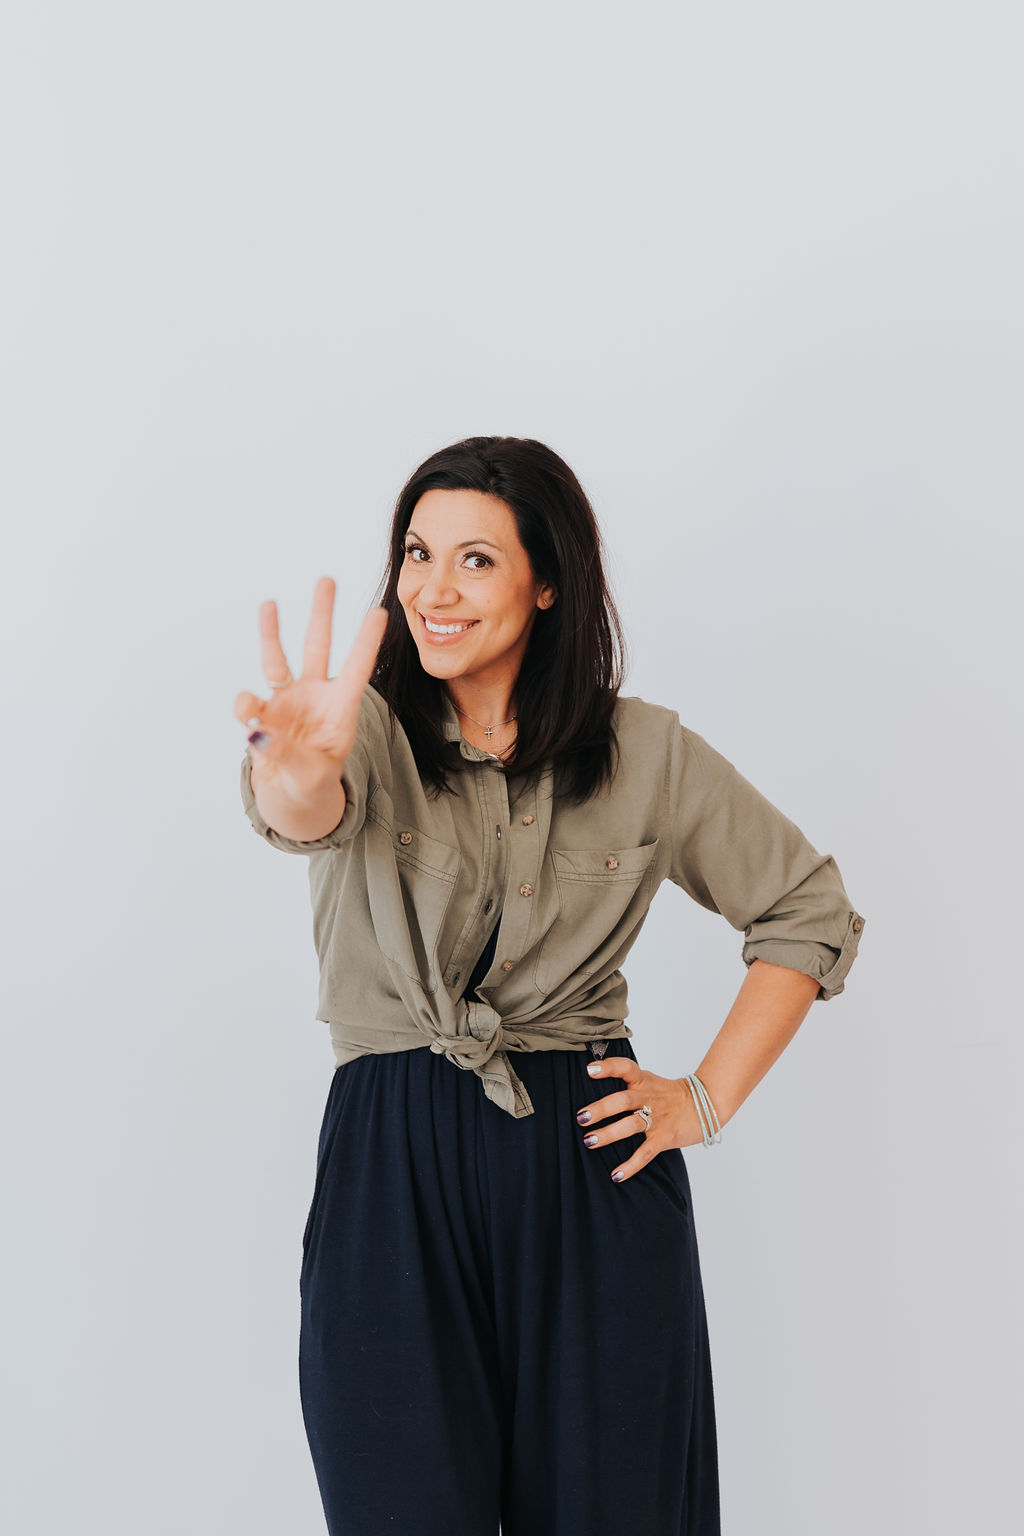 dark haired woman with a khaki blouse and black skirt is standing, facing the camera. She has her left hand on her hip and her right hand is raised up near her shoulder while holding up three fingers. She is smiling.